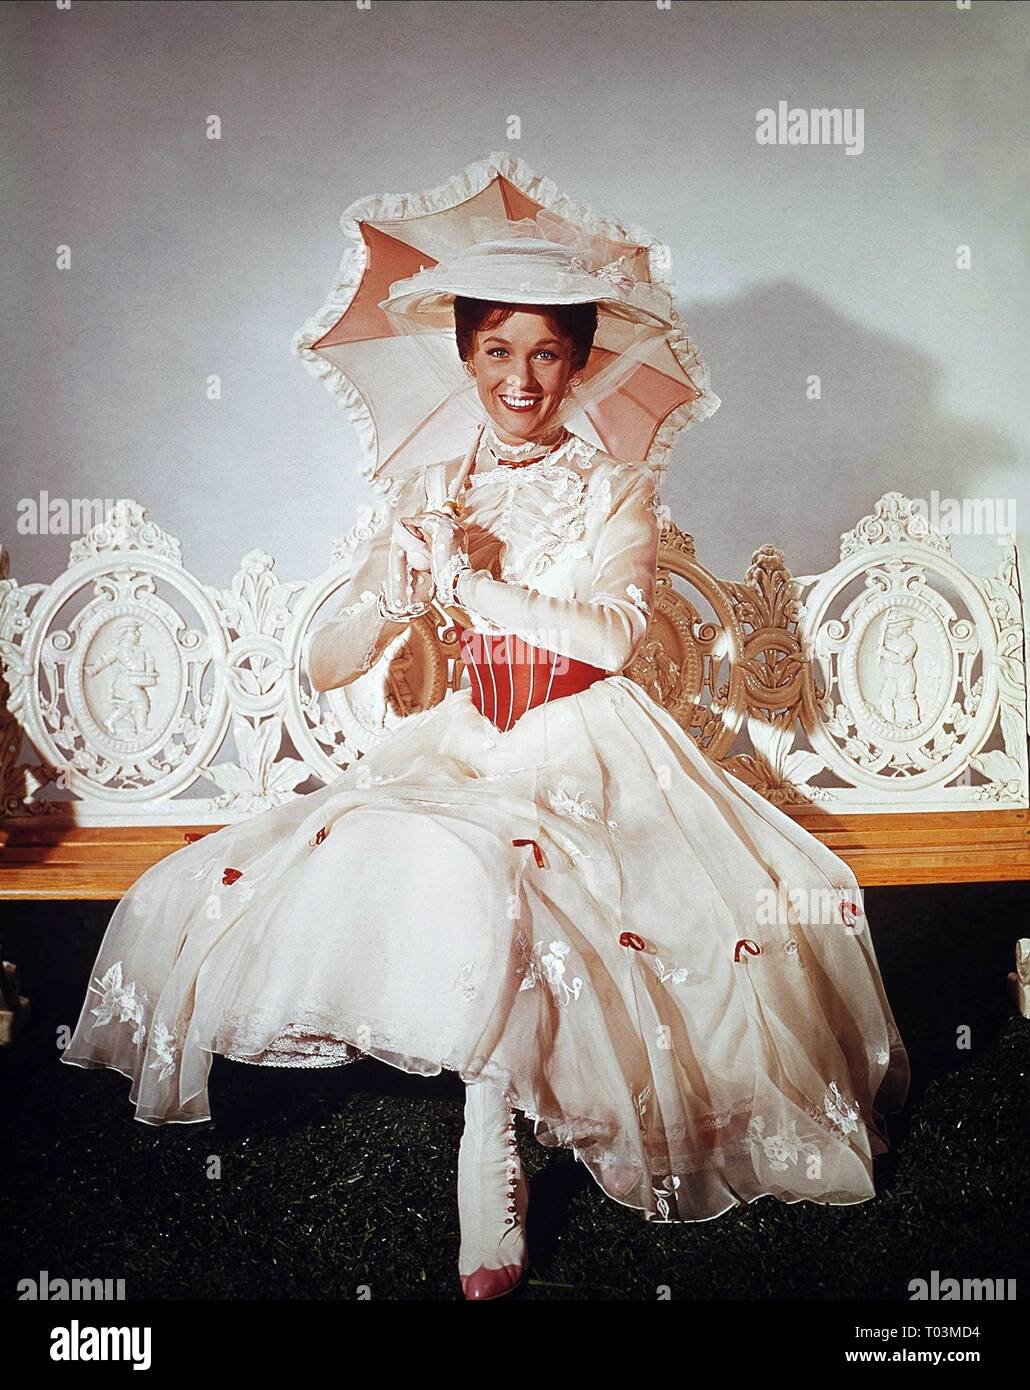 The white dress (child version) worn by Mary Poppins (Julie